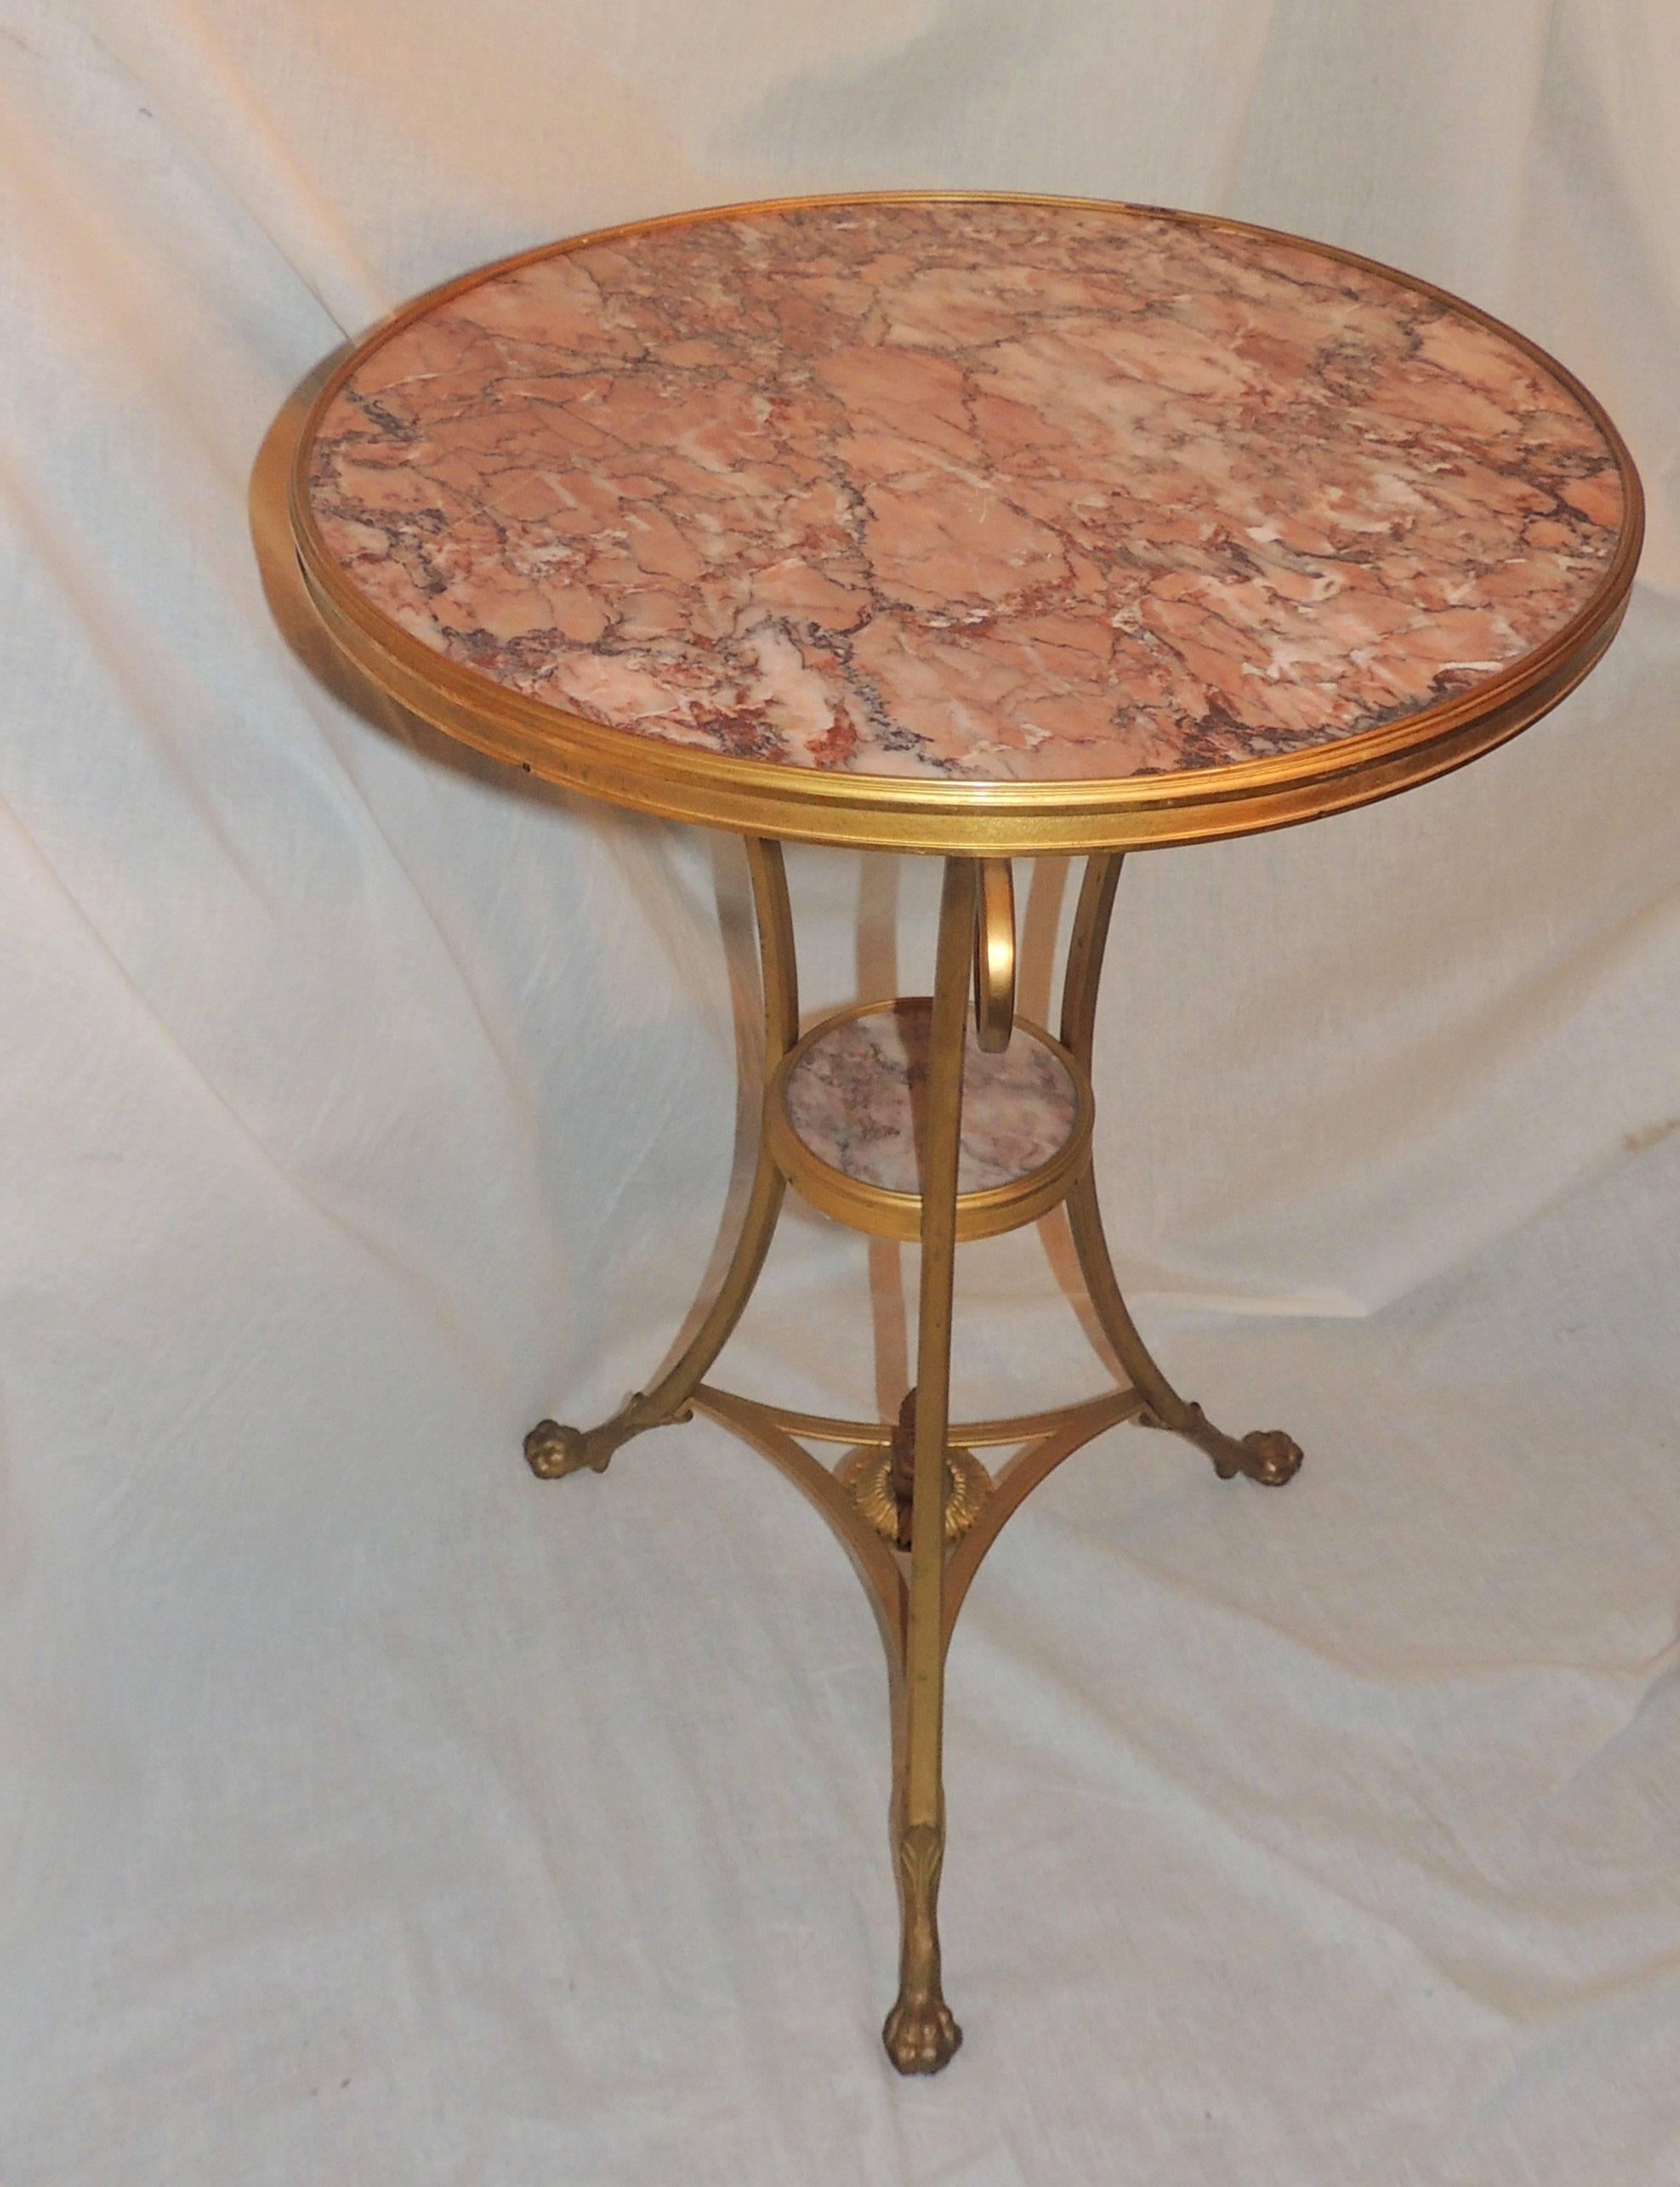 
Wonderful French etched bronze ormolu and rouge marble-top gueridon table with 6" rouge marble center shelf. Scroll arms accent the sides of this table with lovely claw feet.

Measures: 19" W x 28" H with 6" center shelf.